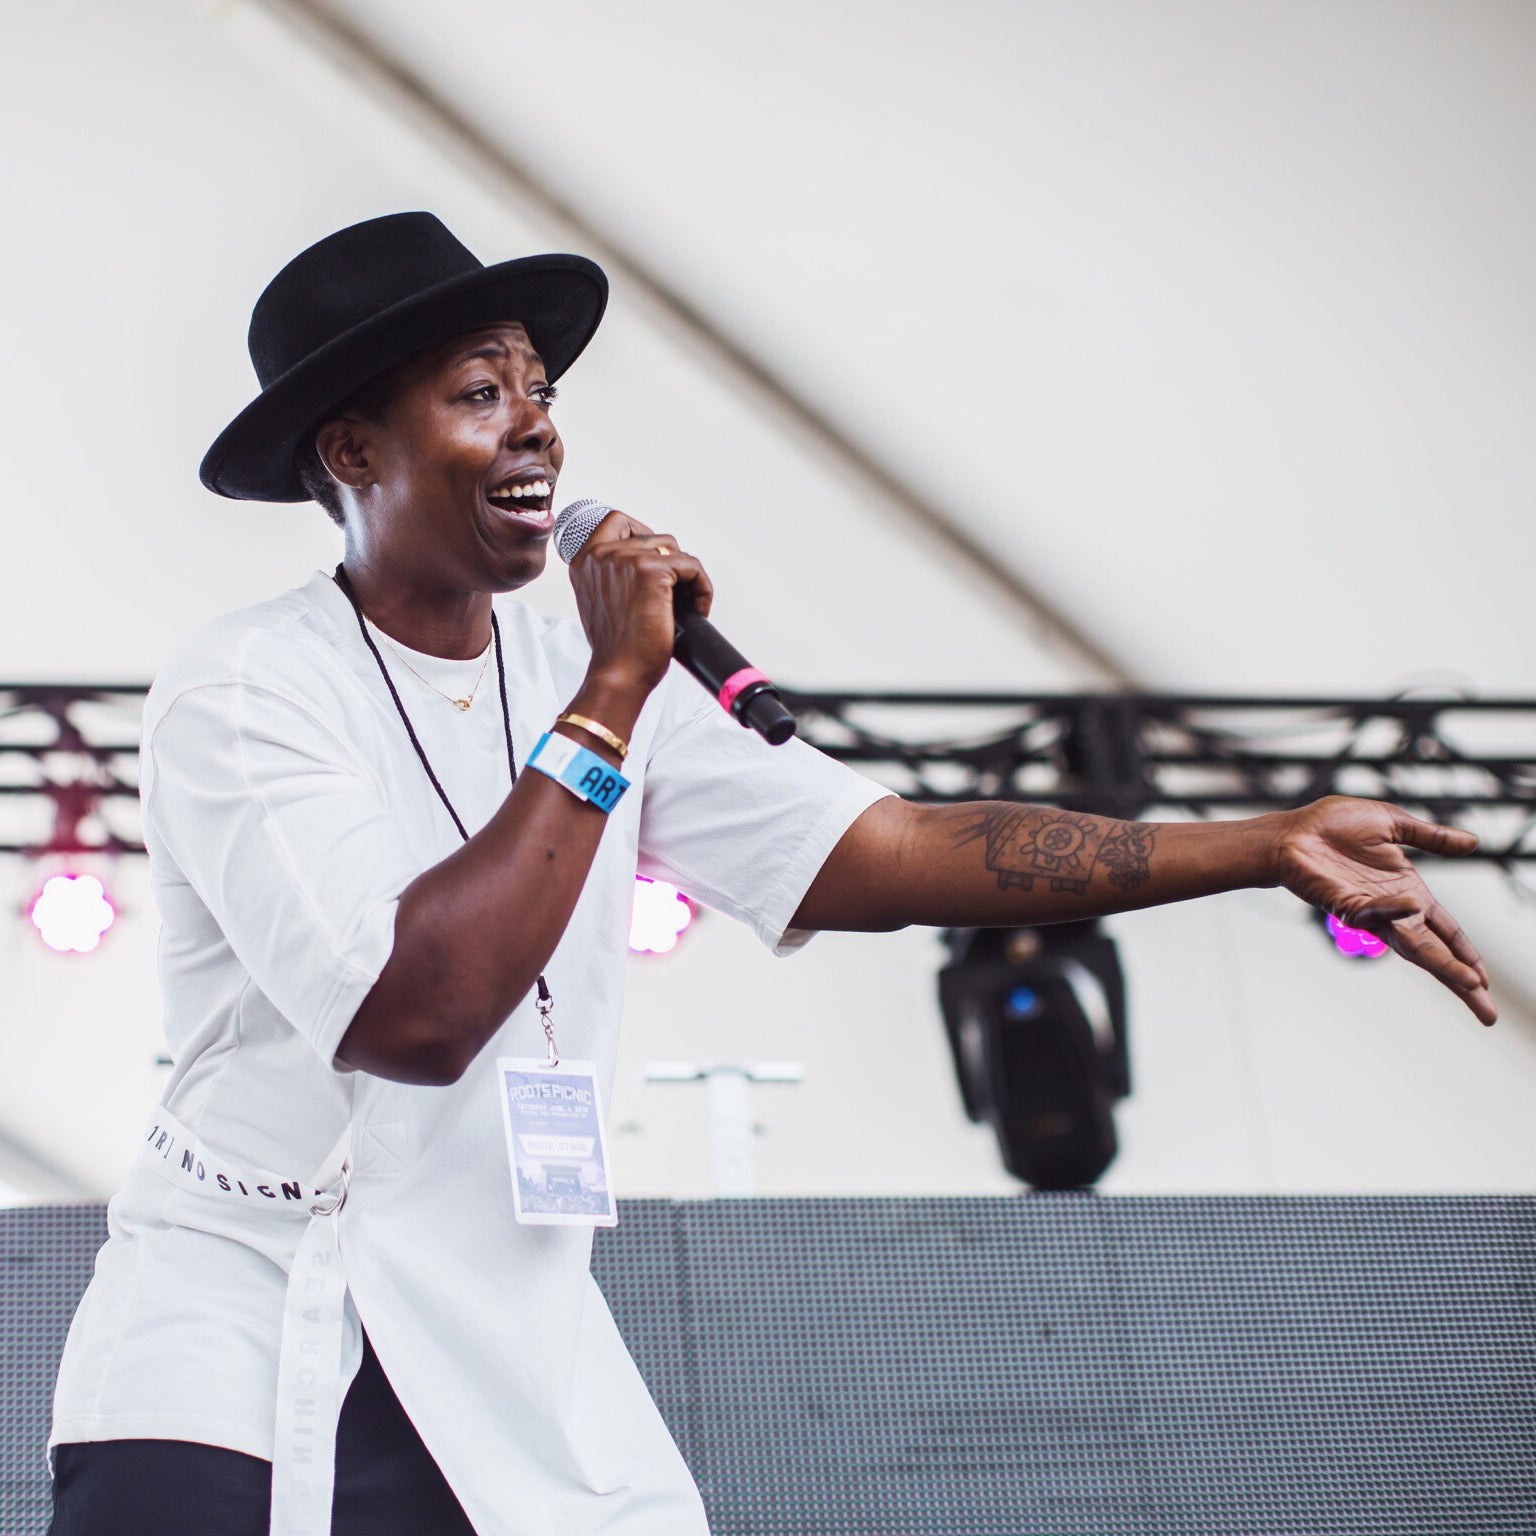 These 2016 ROOTS Picnic Performance Photos Are Epic
